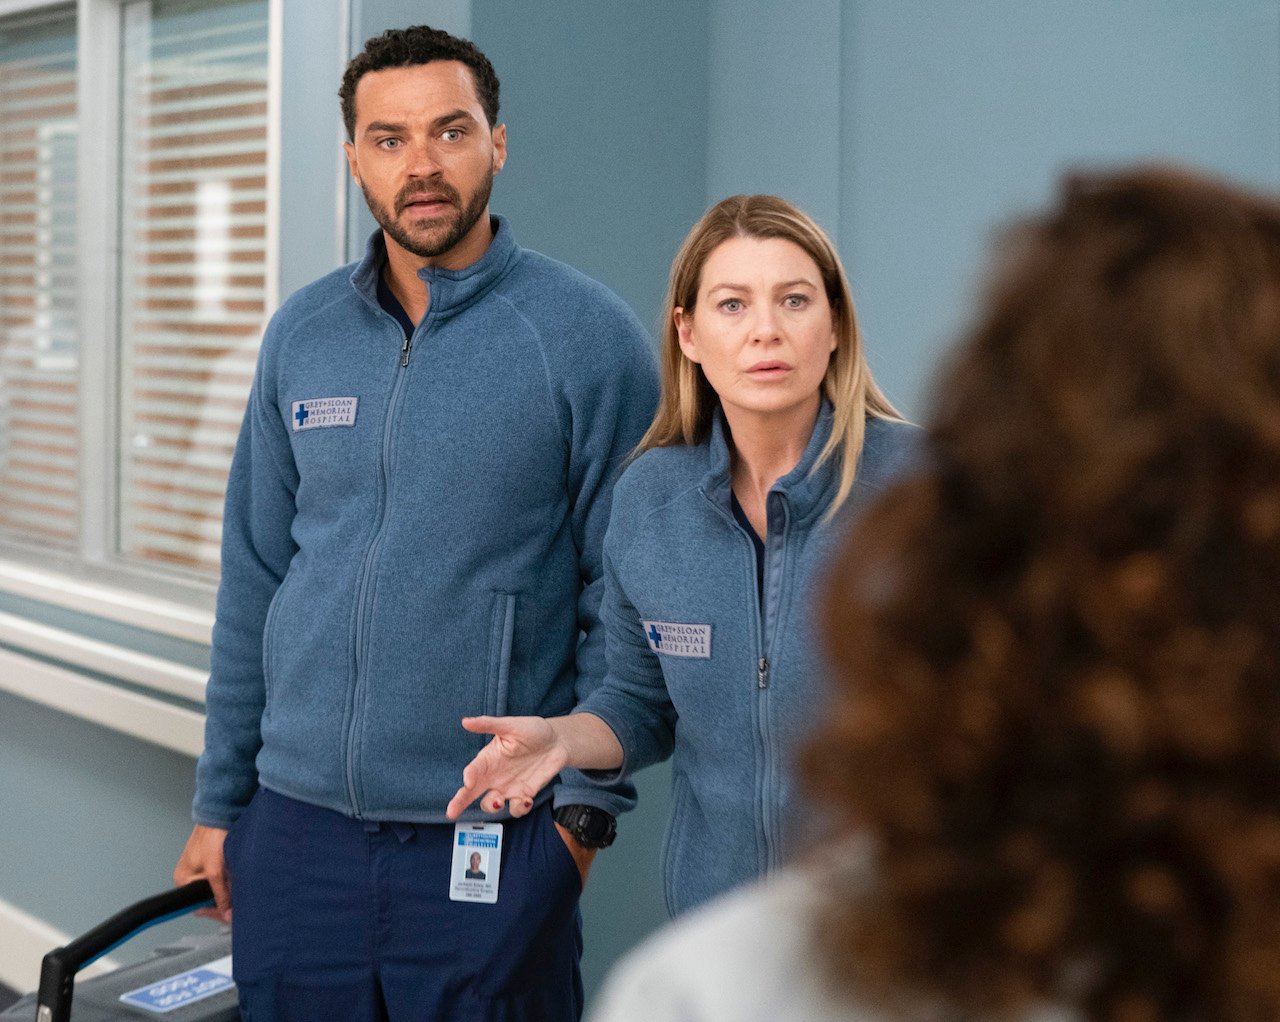 Jesse Williams as Jackson Avery and Ellen Pompeo as Meredith Grey stand next to each other in the hospital on 'Grey's Anatomy'.